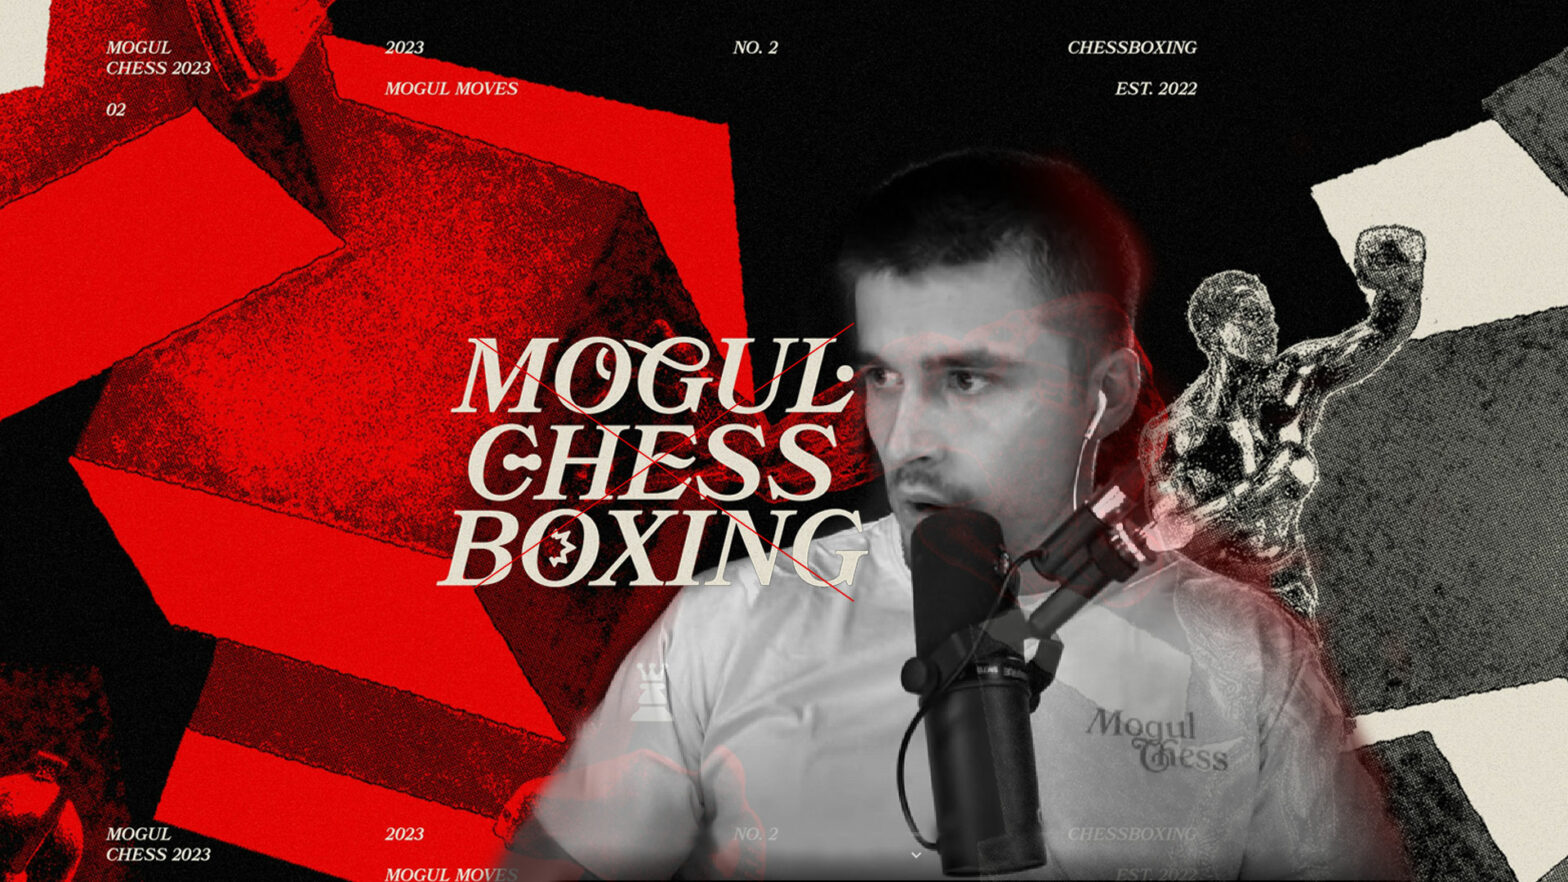 Hopefully I don't go bankrupt, Ludwig sells Mogul Chessboxing tickets for  $1 to compensate SWT 2023 victims – FirstSportz